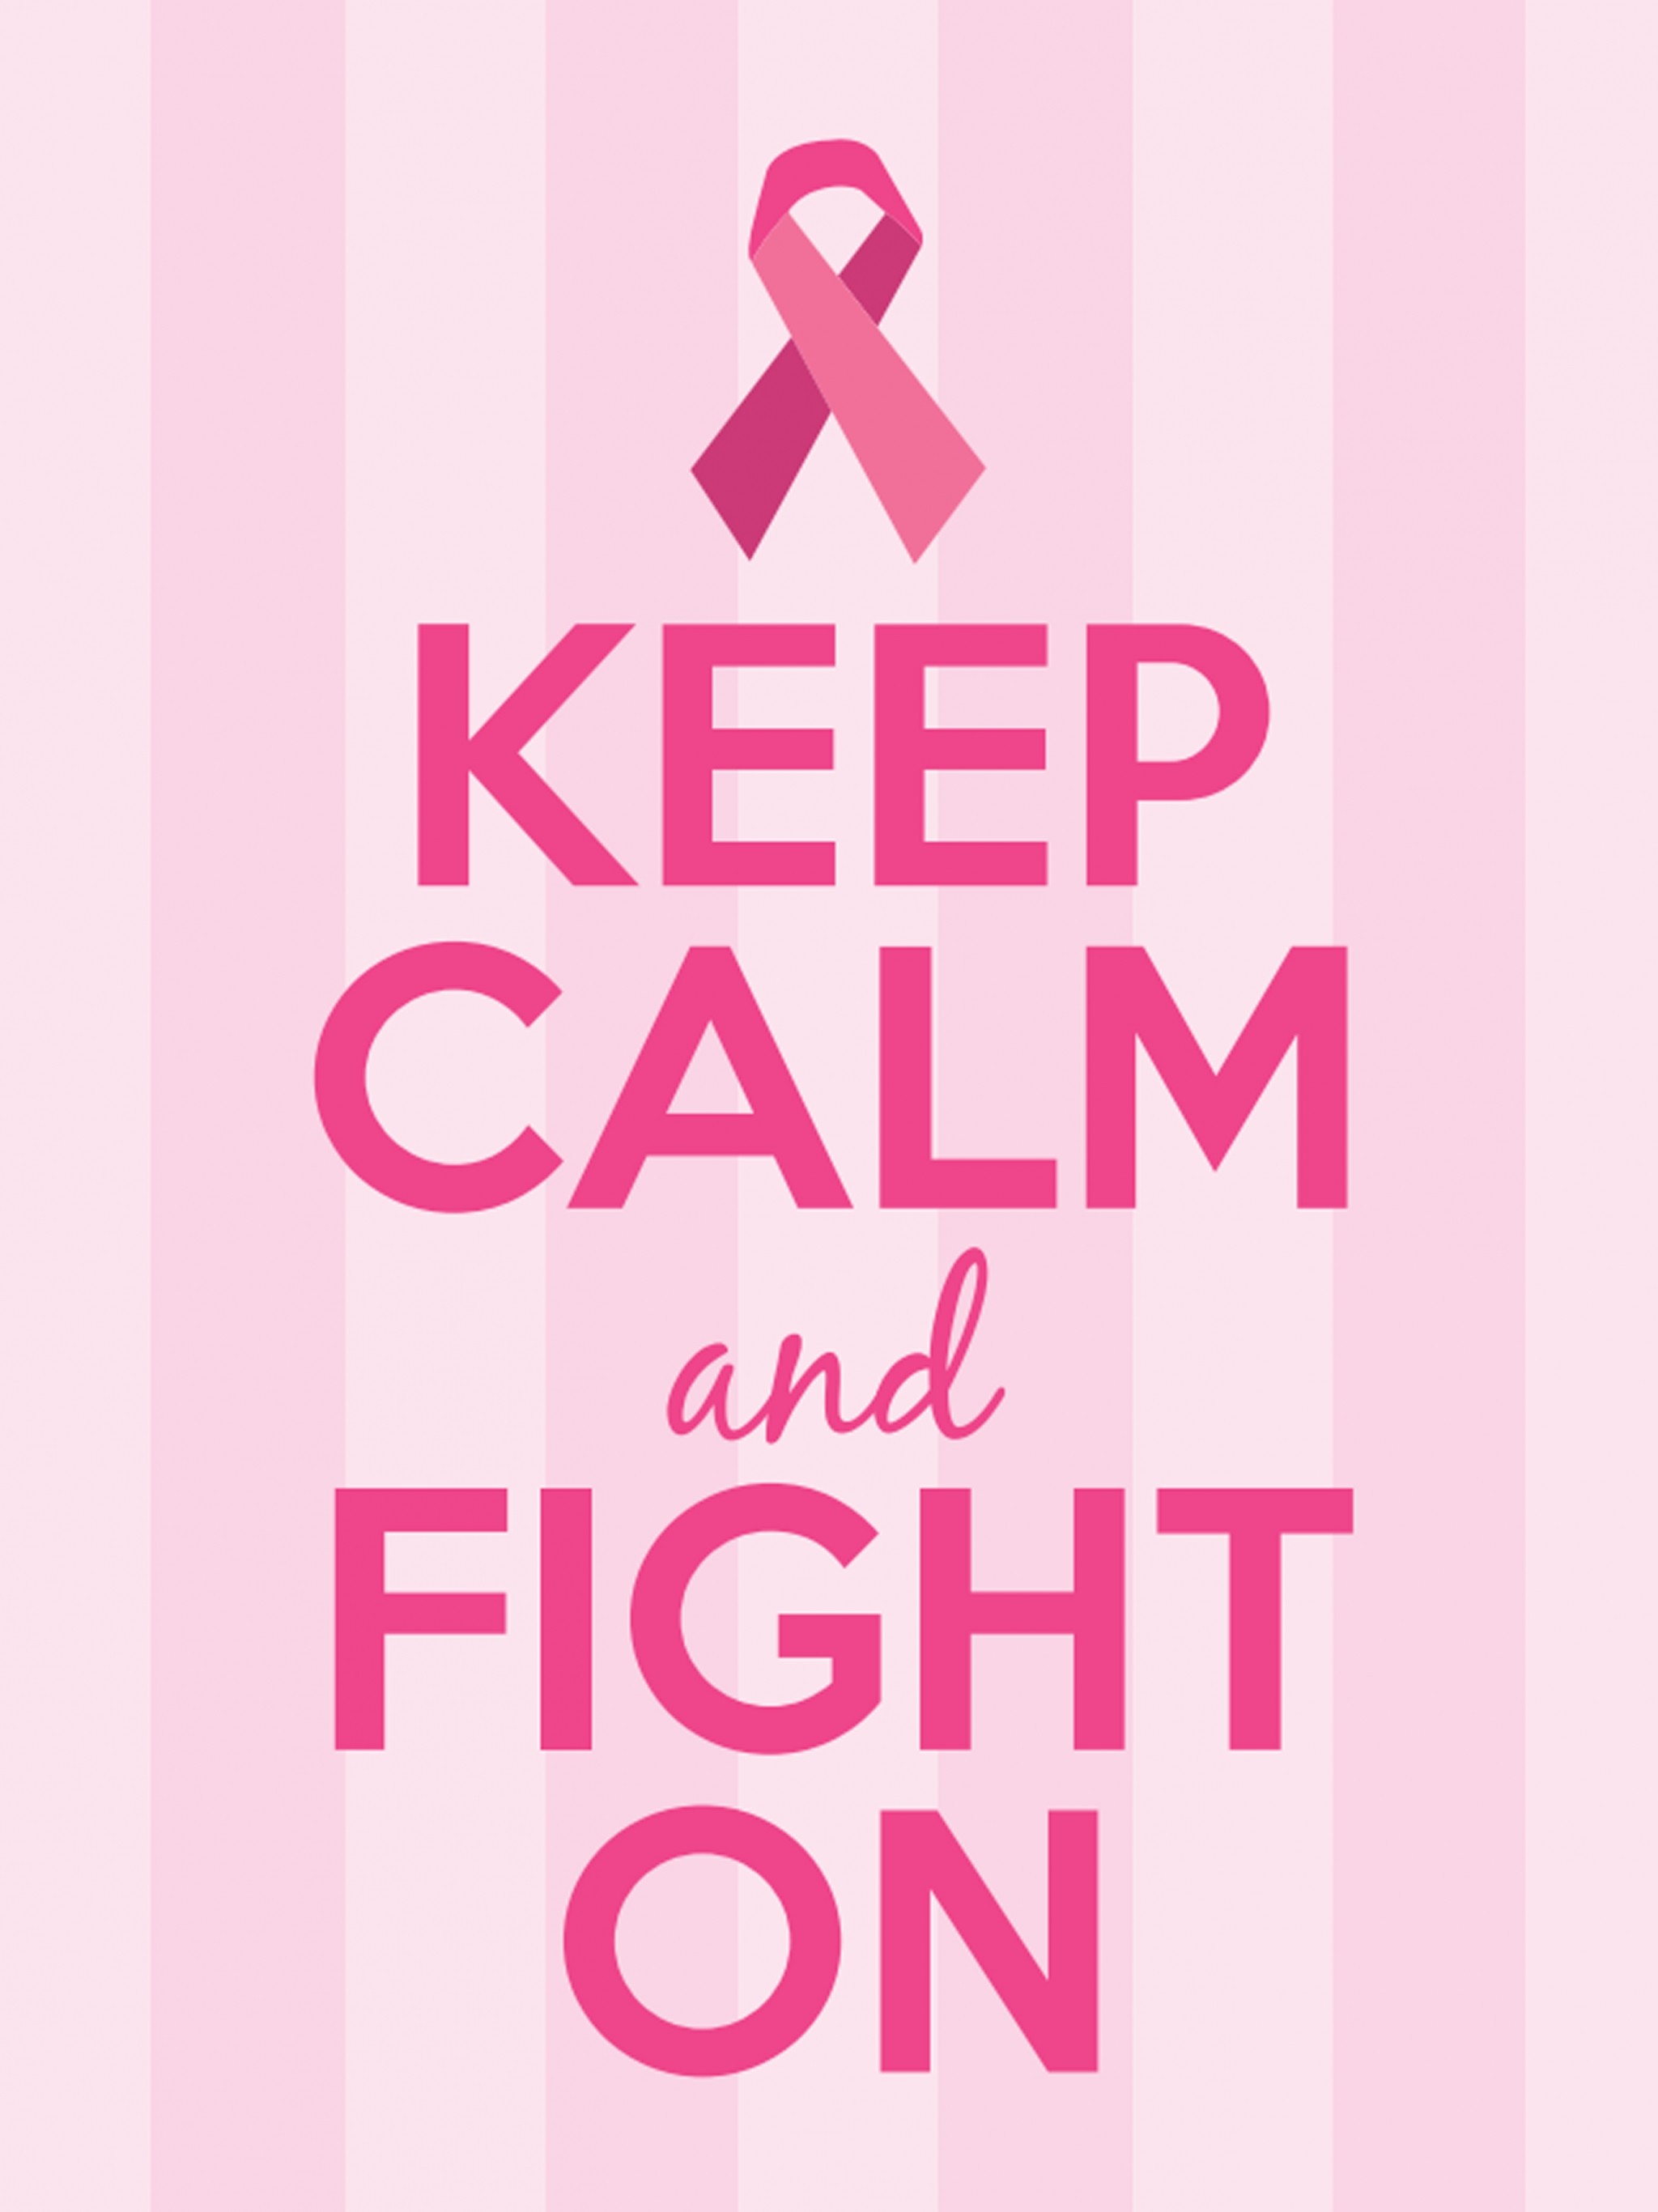 Breast cancer awareness with ribbon Free Vector wallpaper 9752765 Vector  Art at Vecteezy